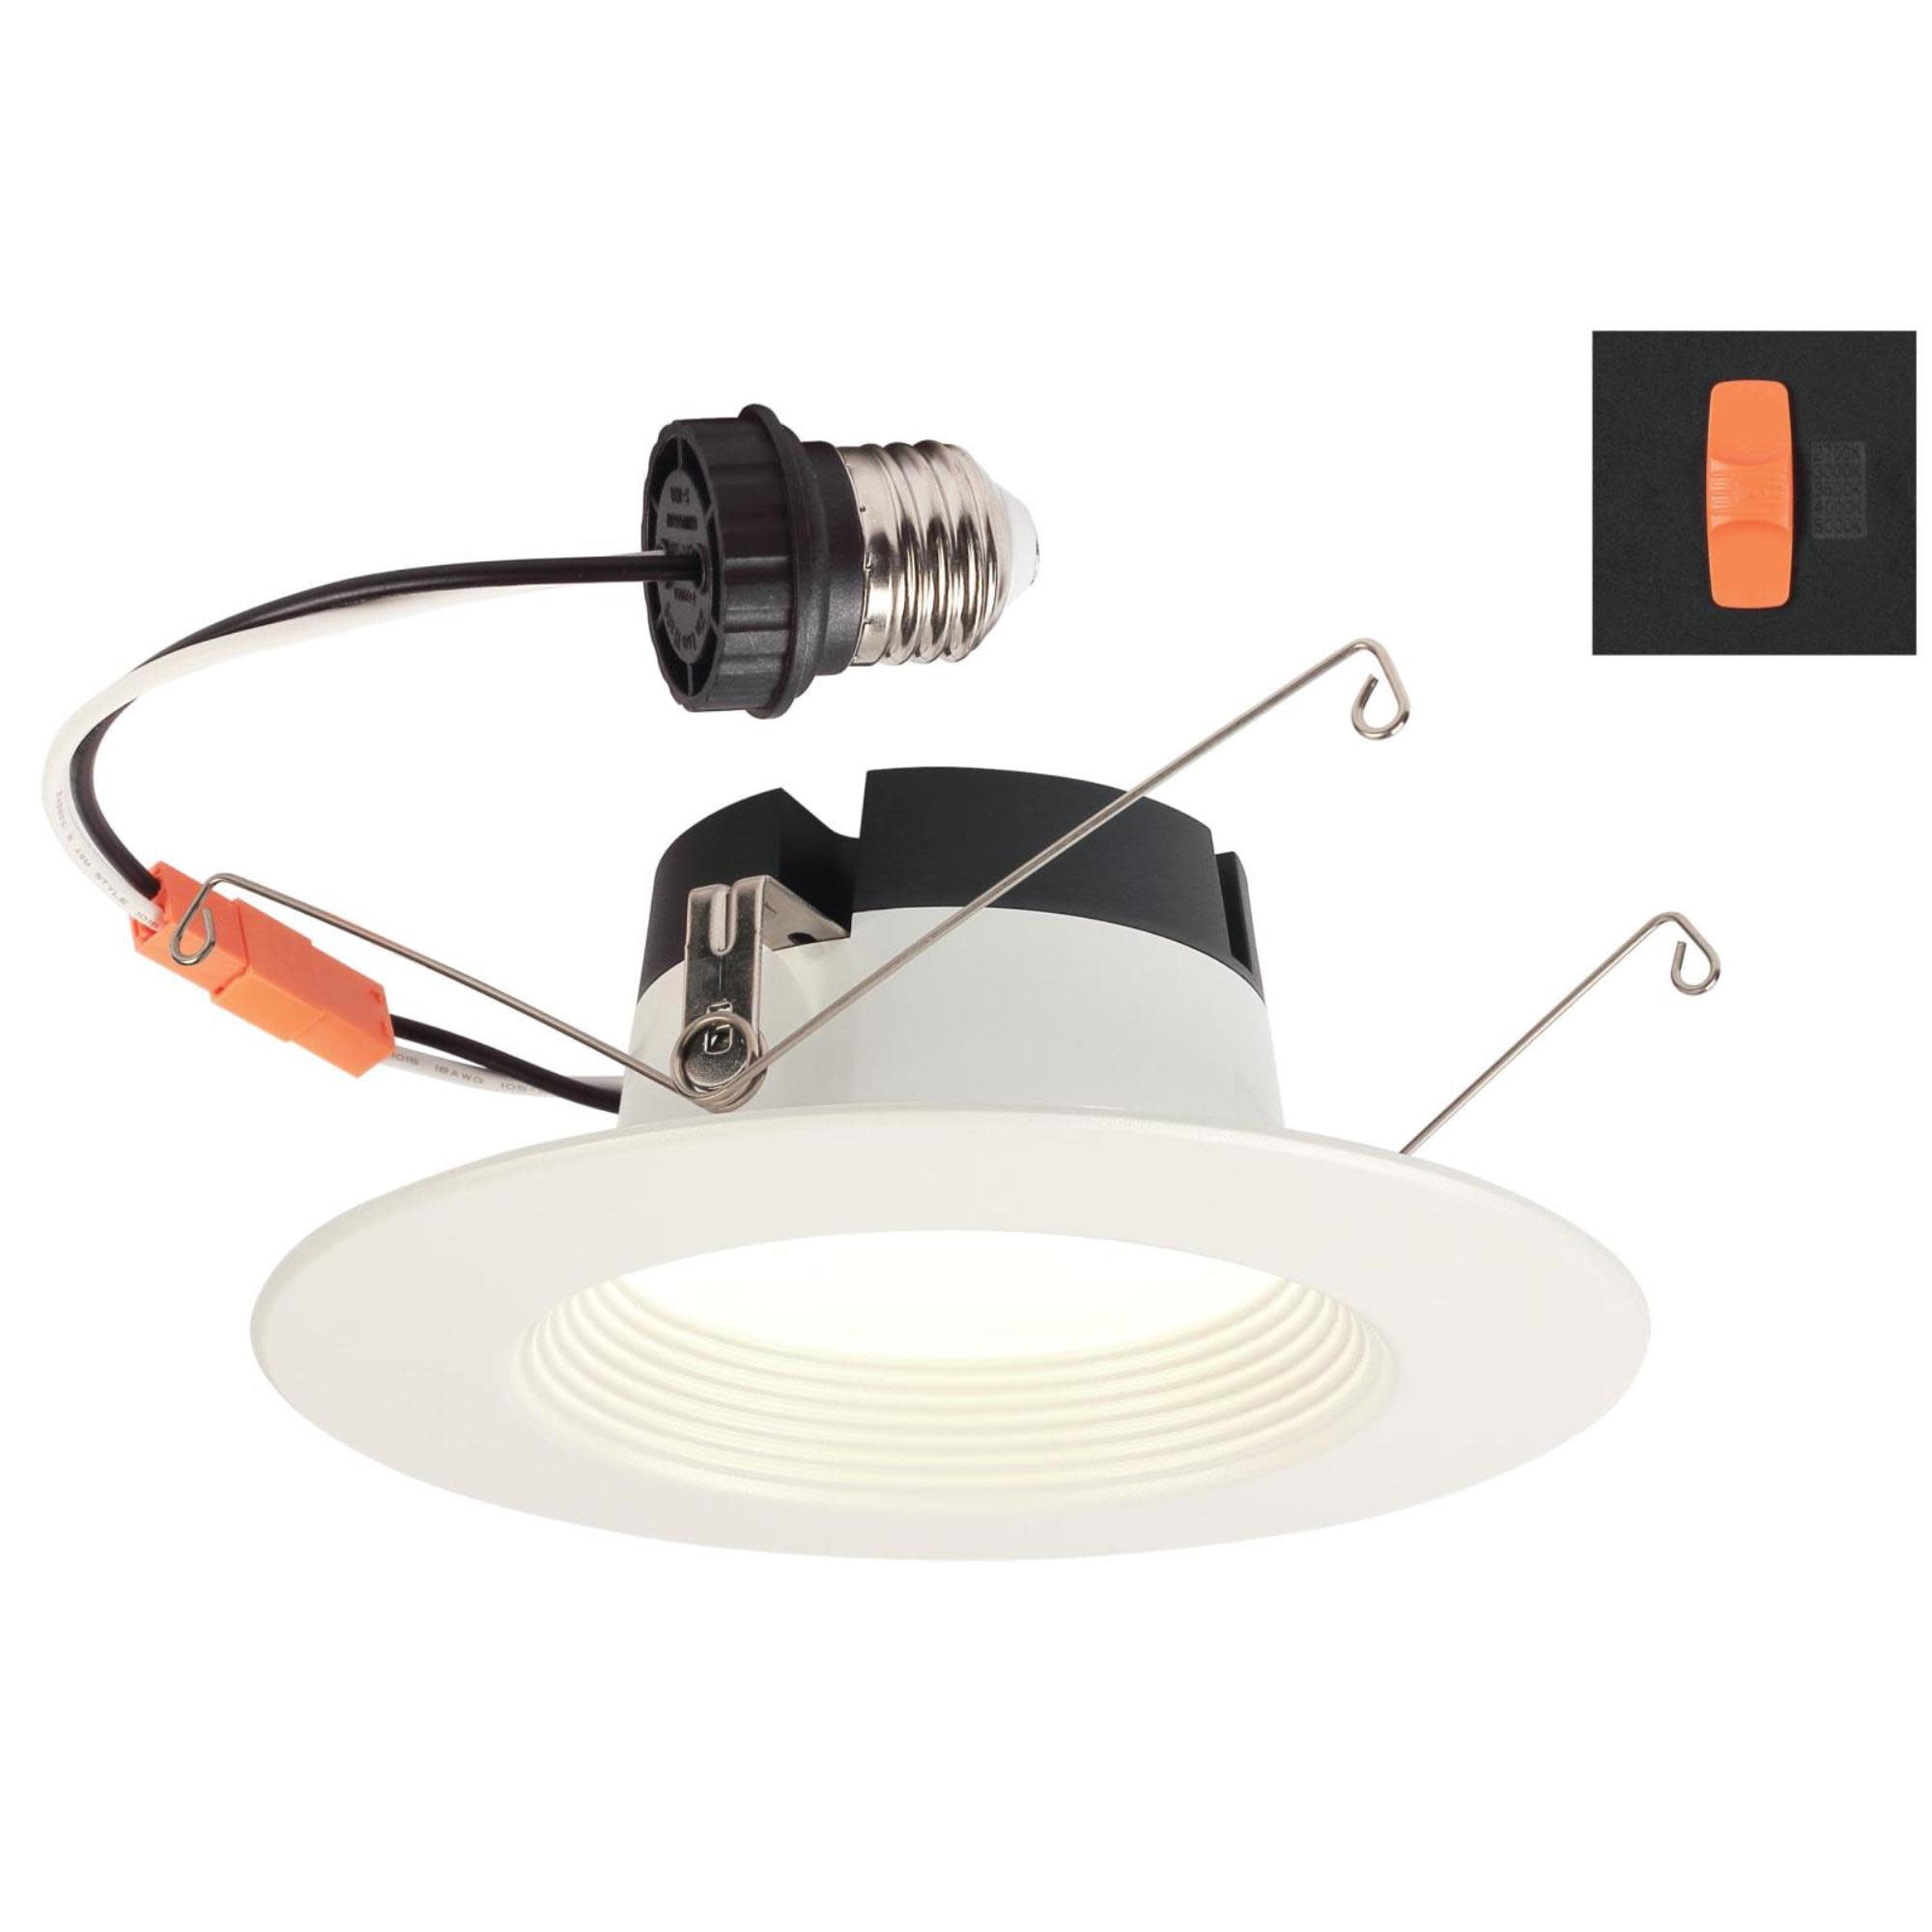 Westinghouse 3105500 100W Equivalent 6" Square Recessed LED Downlight Dimmabl... 